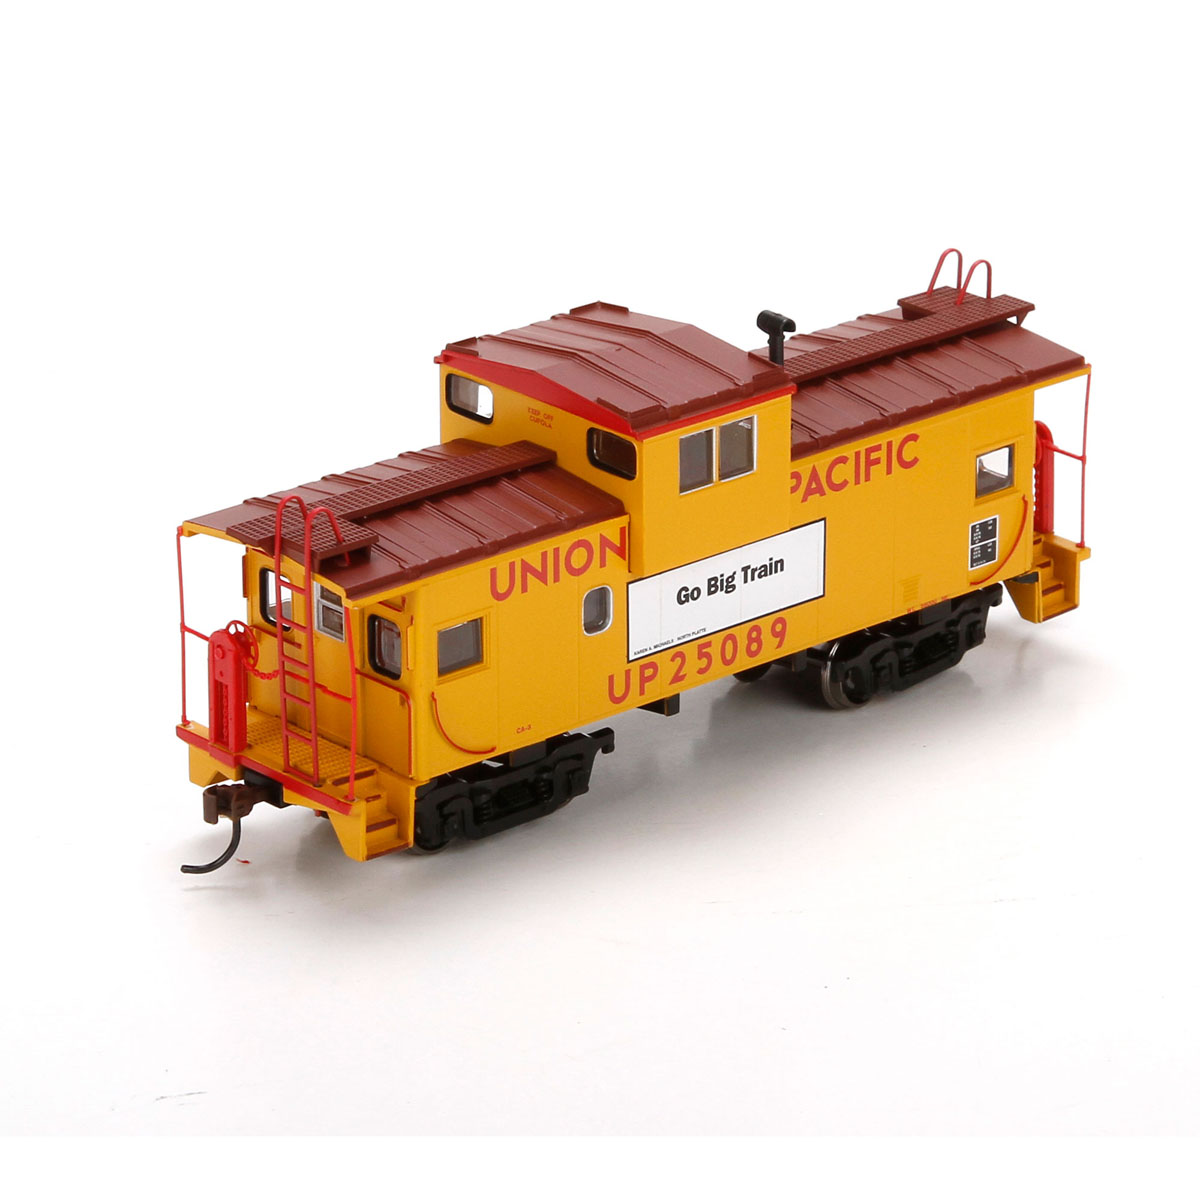 Conductor's Choice HO scale Union Pacific Caboose 49940 